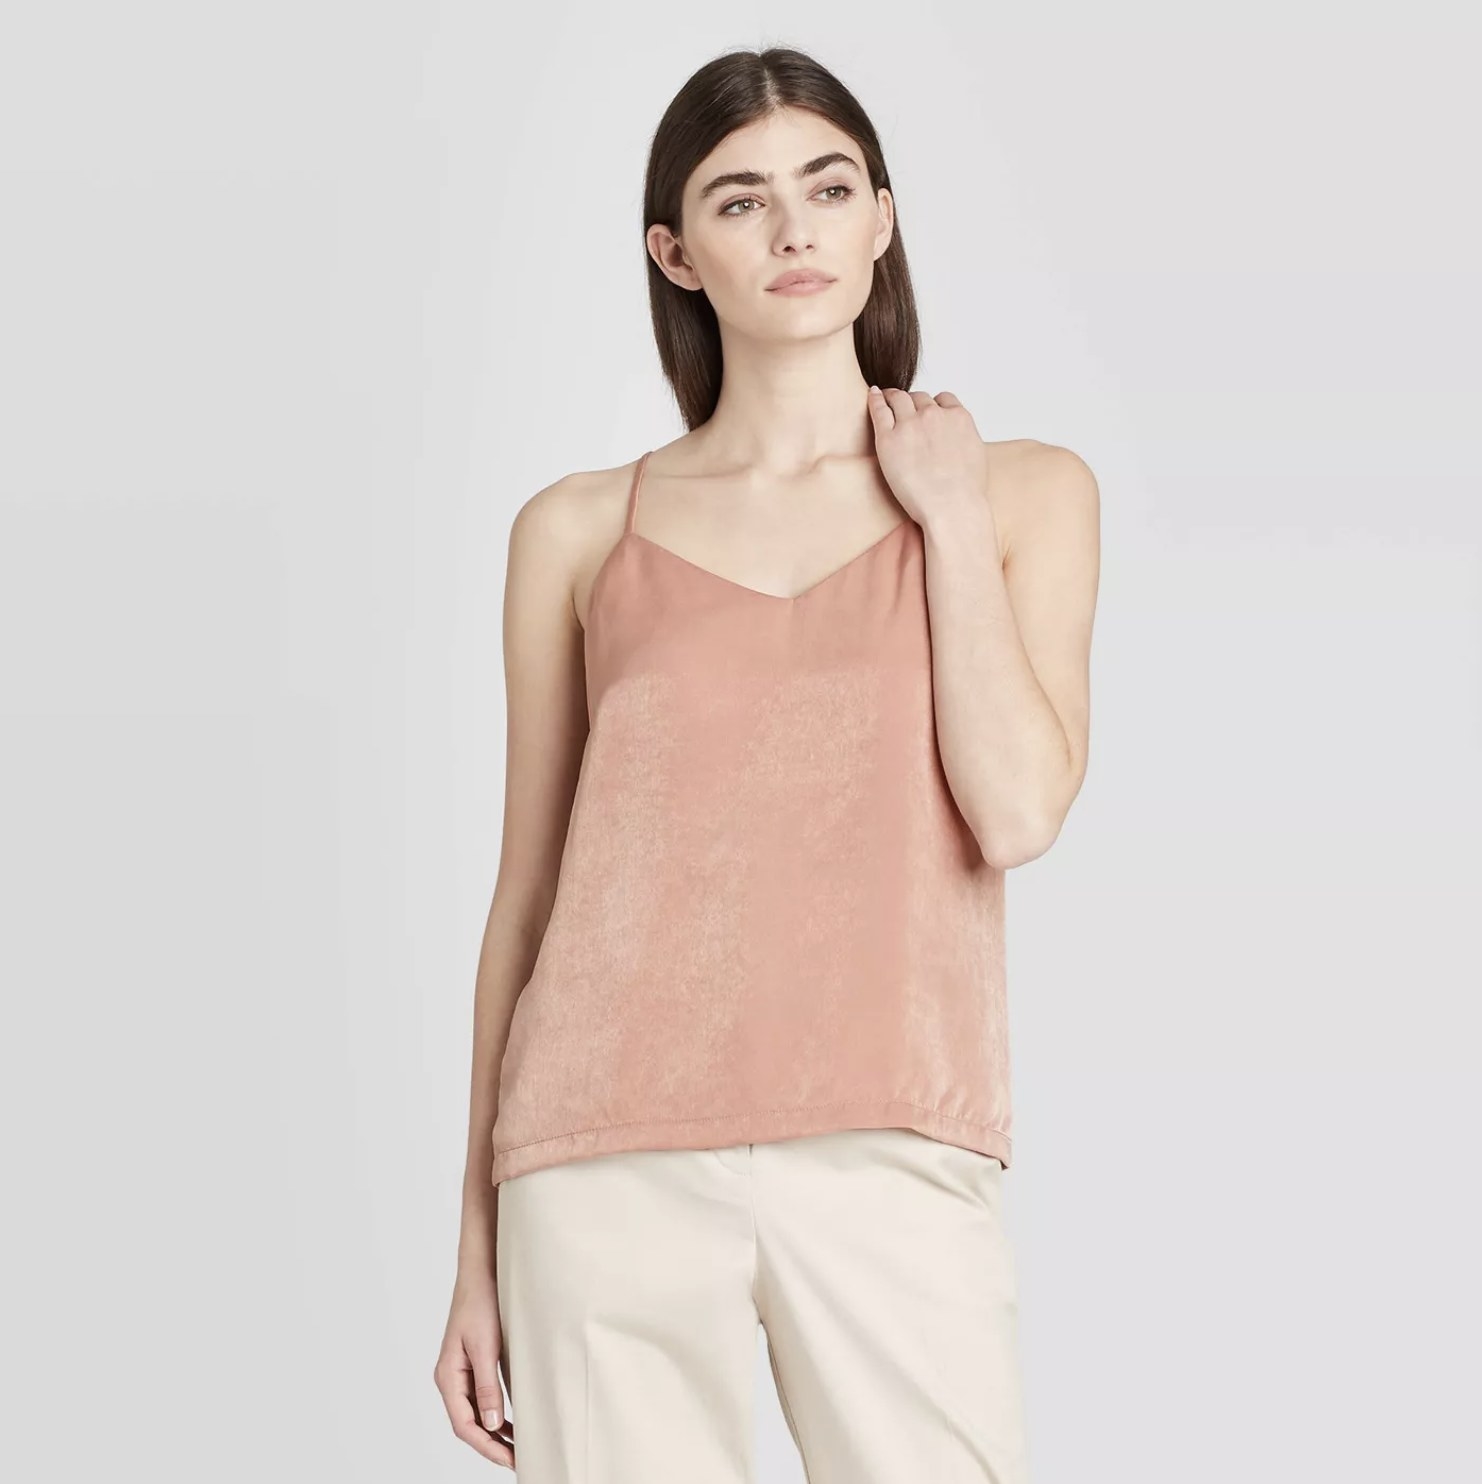 Model is wearing a blush pink v-neck tank top and cream slacks